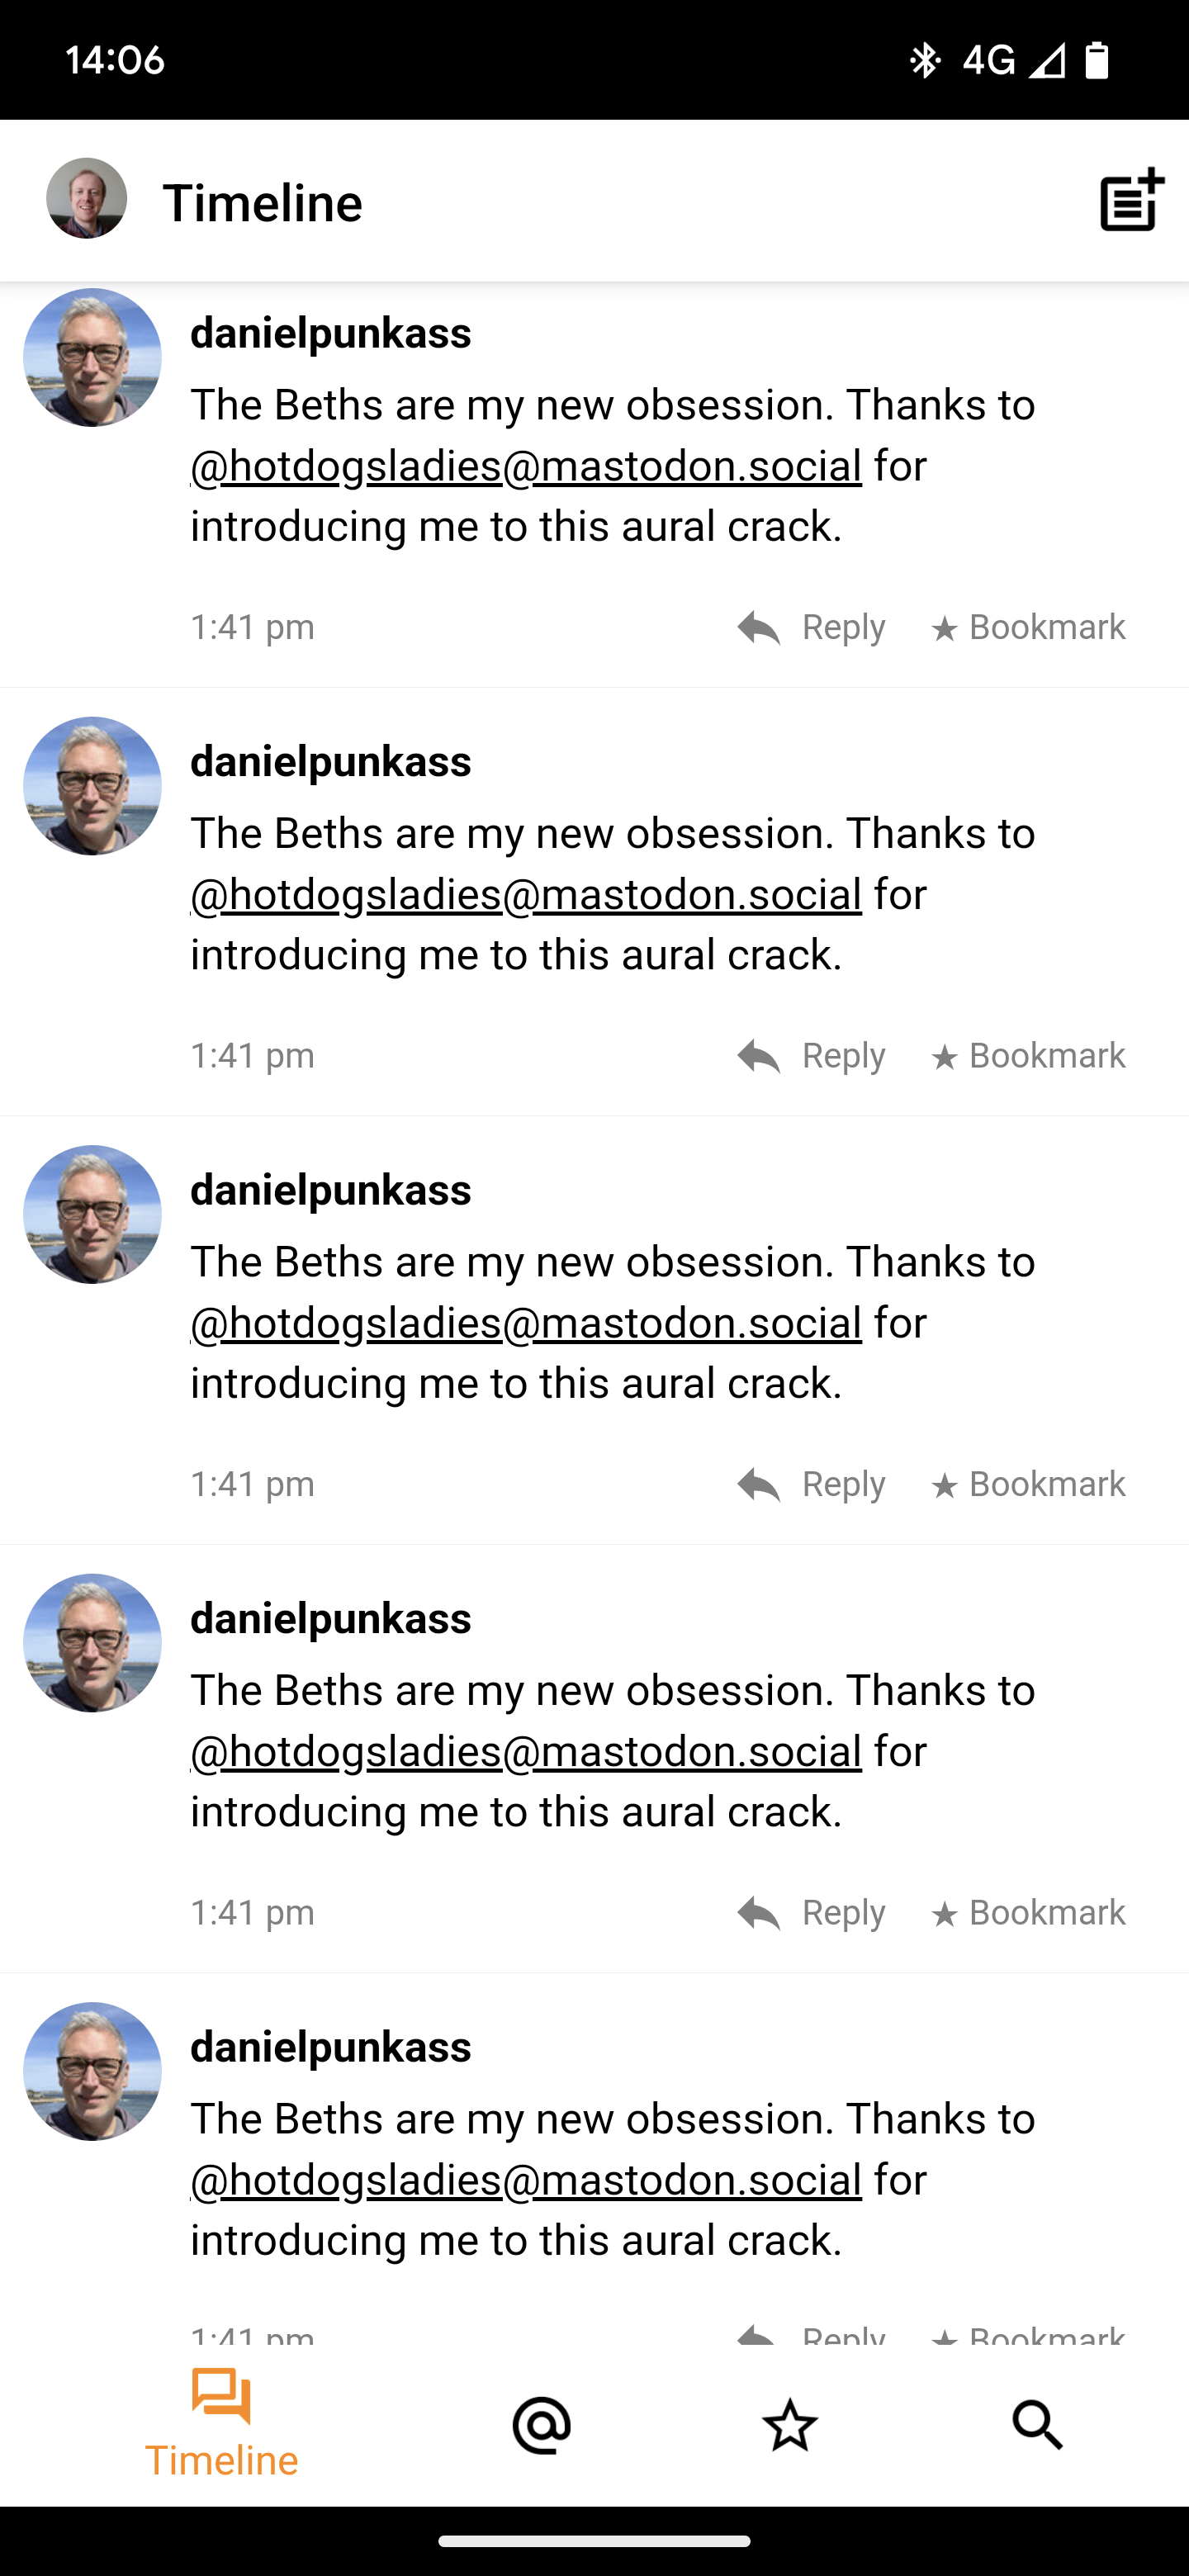 Multiple entries in the Micro.blog timeline of danielpunkass post about the Beths being his new obsession.